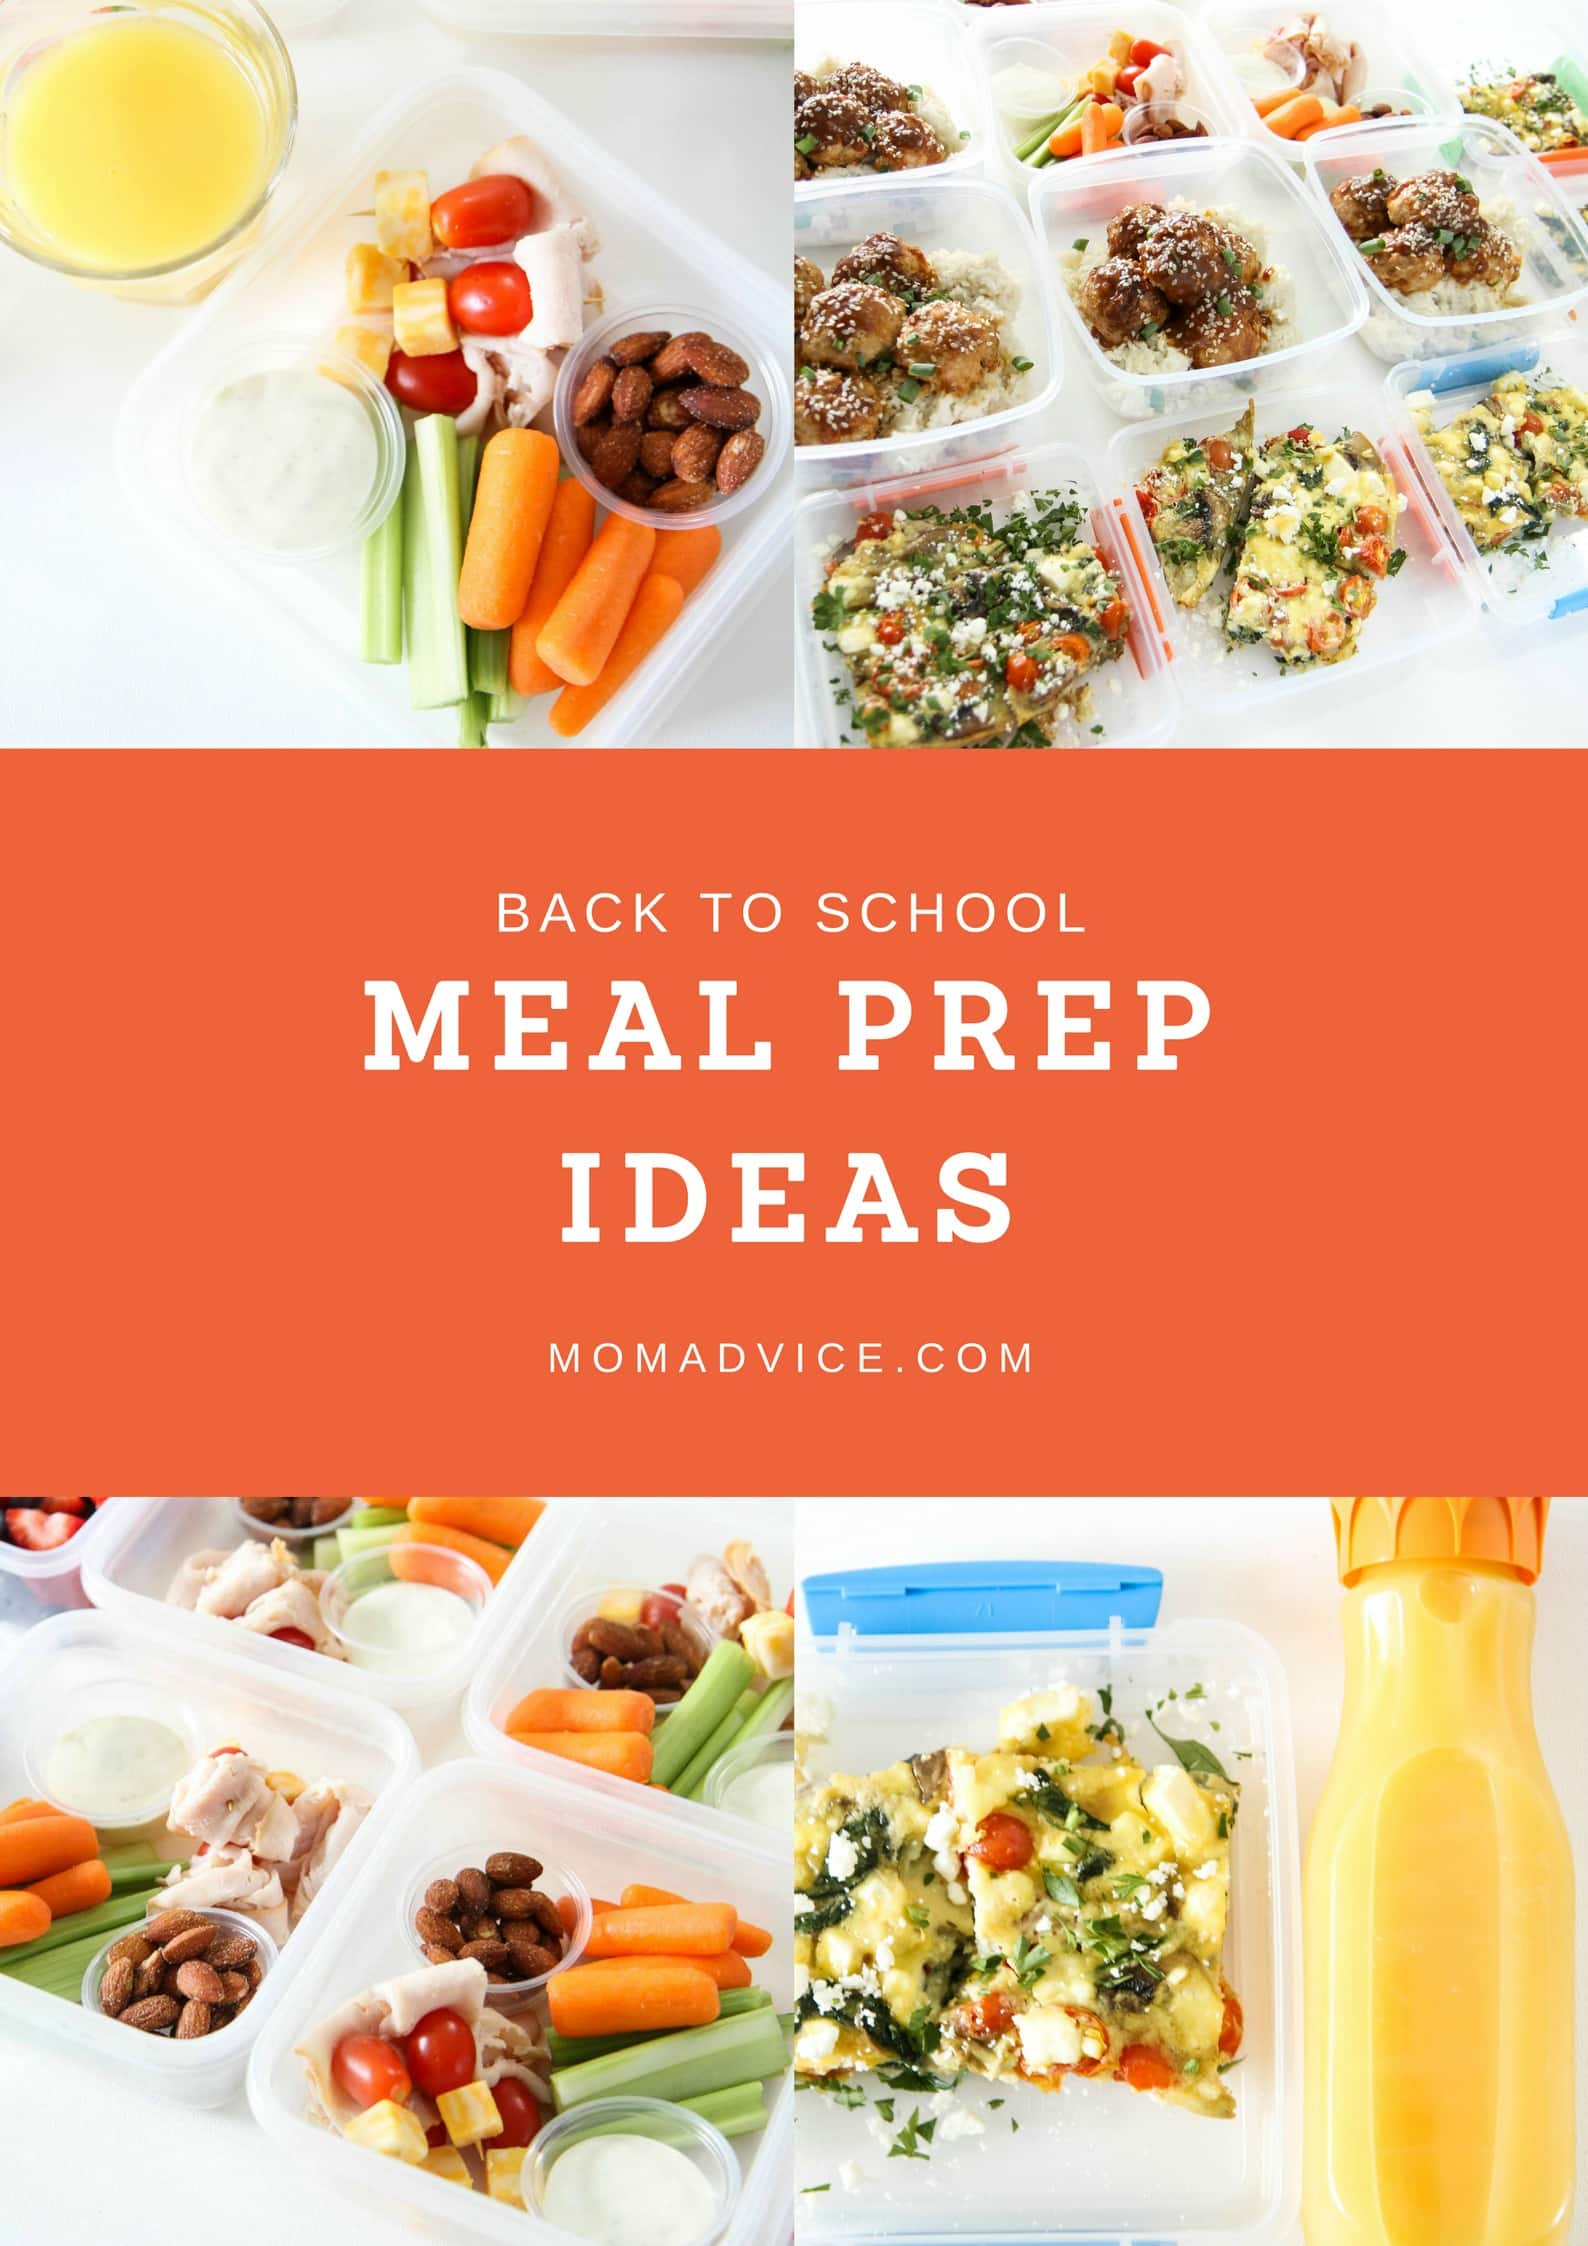 Back to School Meal Prep Ideas from MomAdvice.com